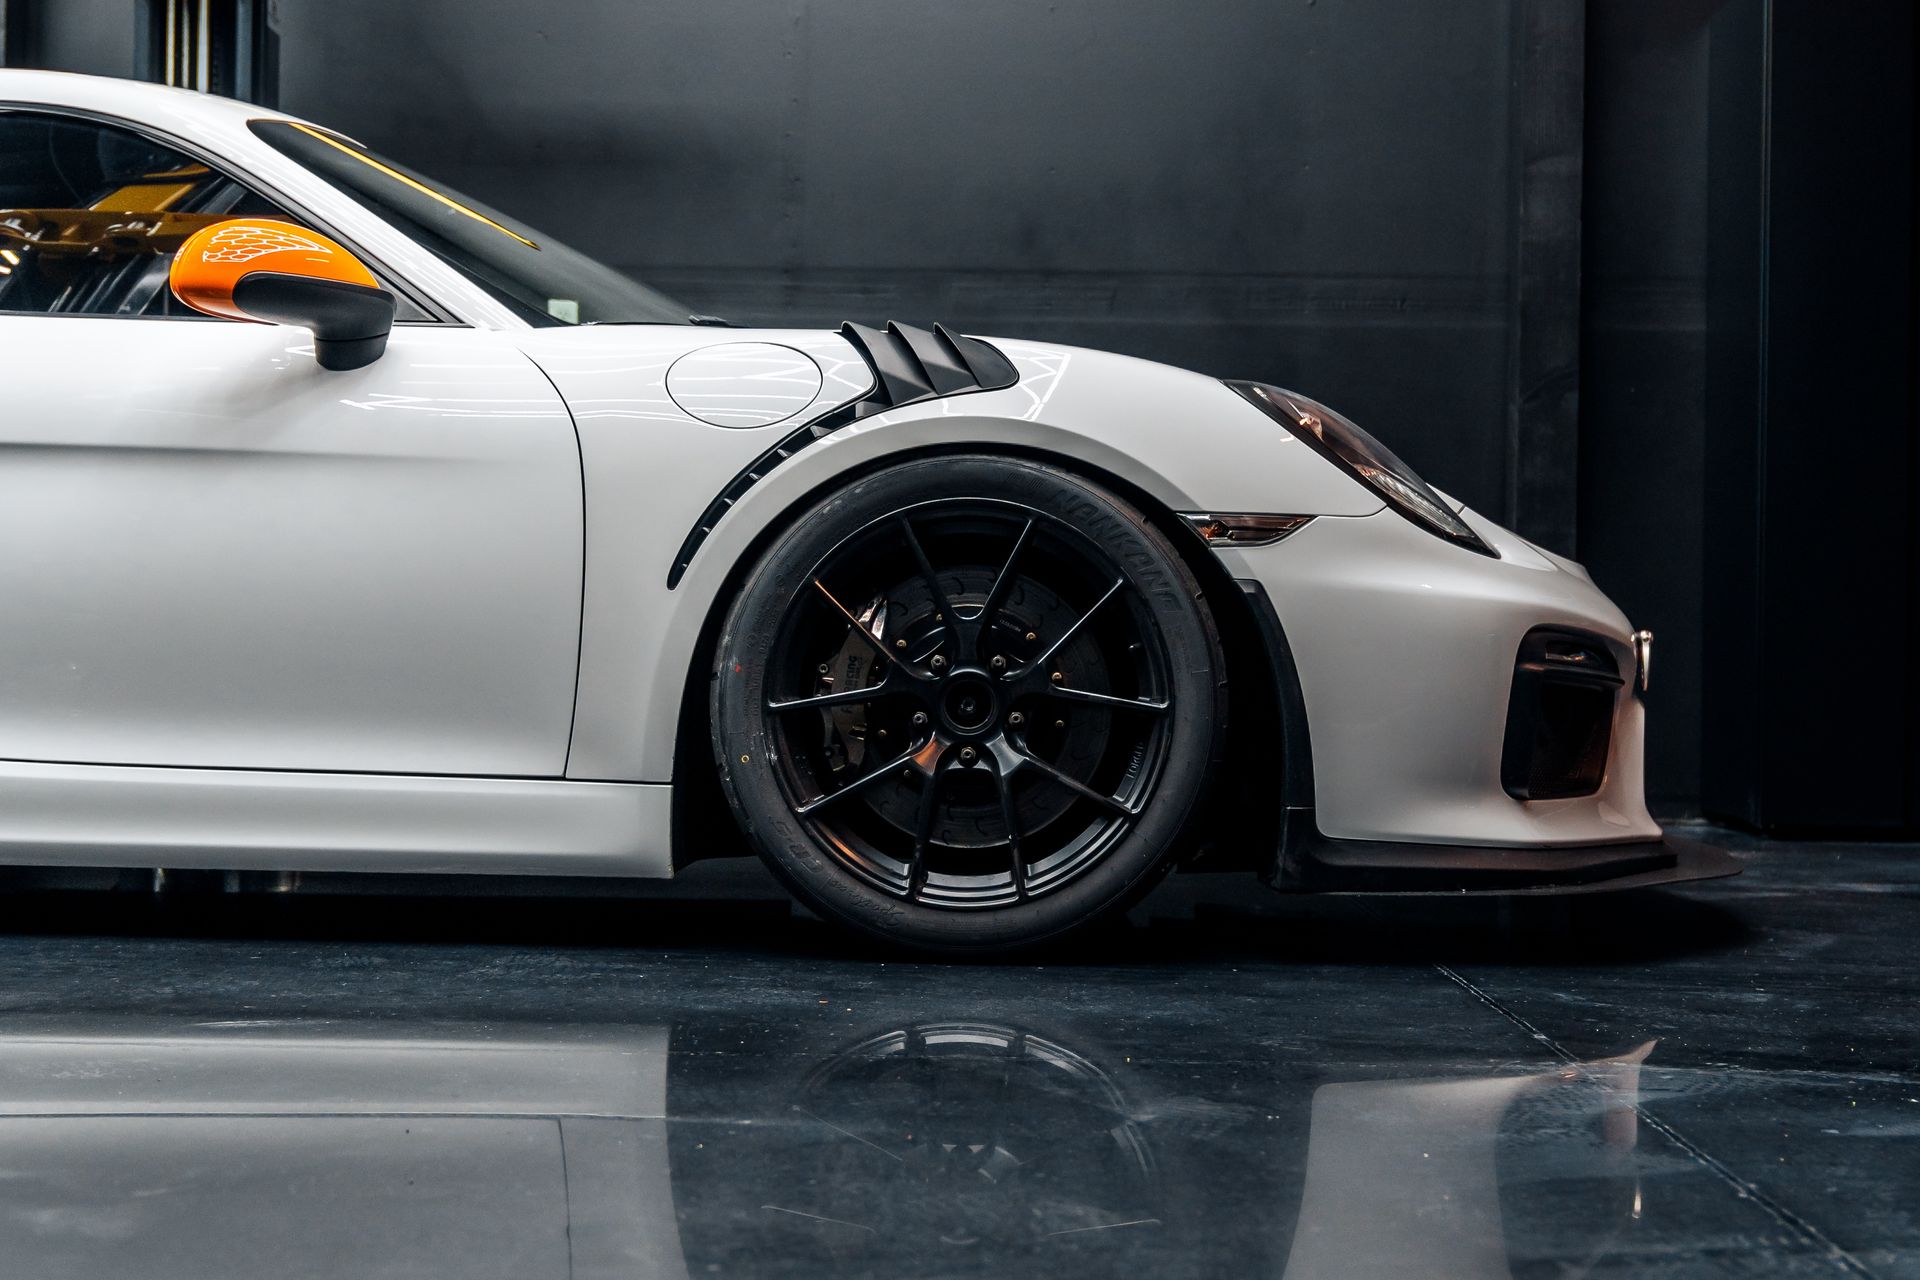 Porsche 981 Cayman Base with 19" VS-5RS in Satin Black